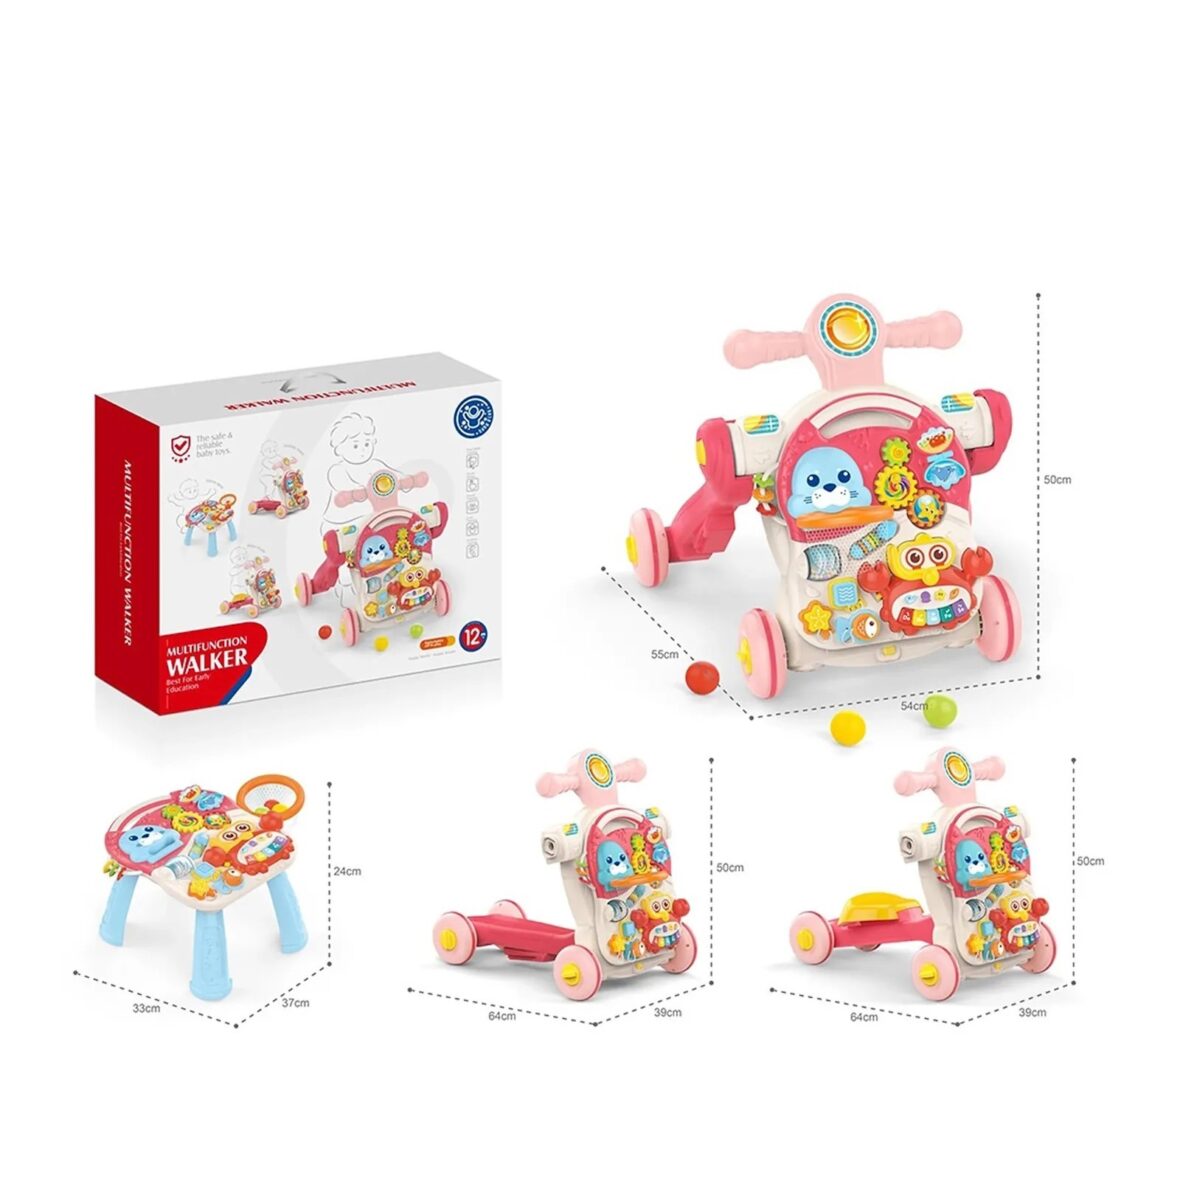 Huanger 4 in 1 Multifunction Baby Walker With Music- Trendy Design – Pink